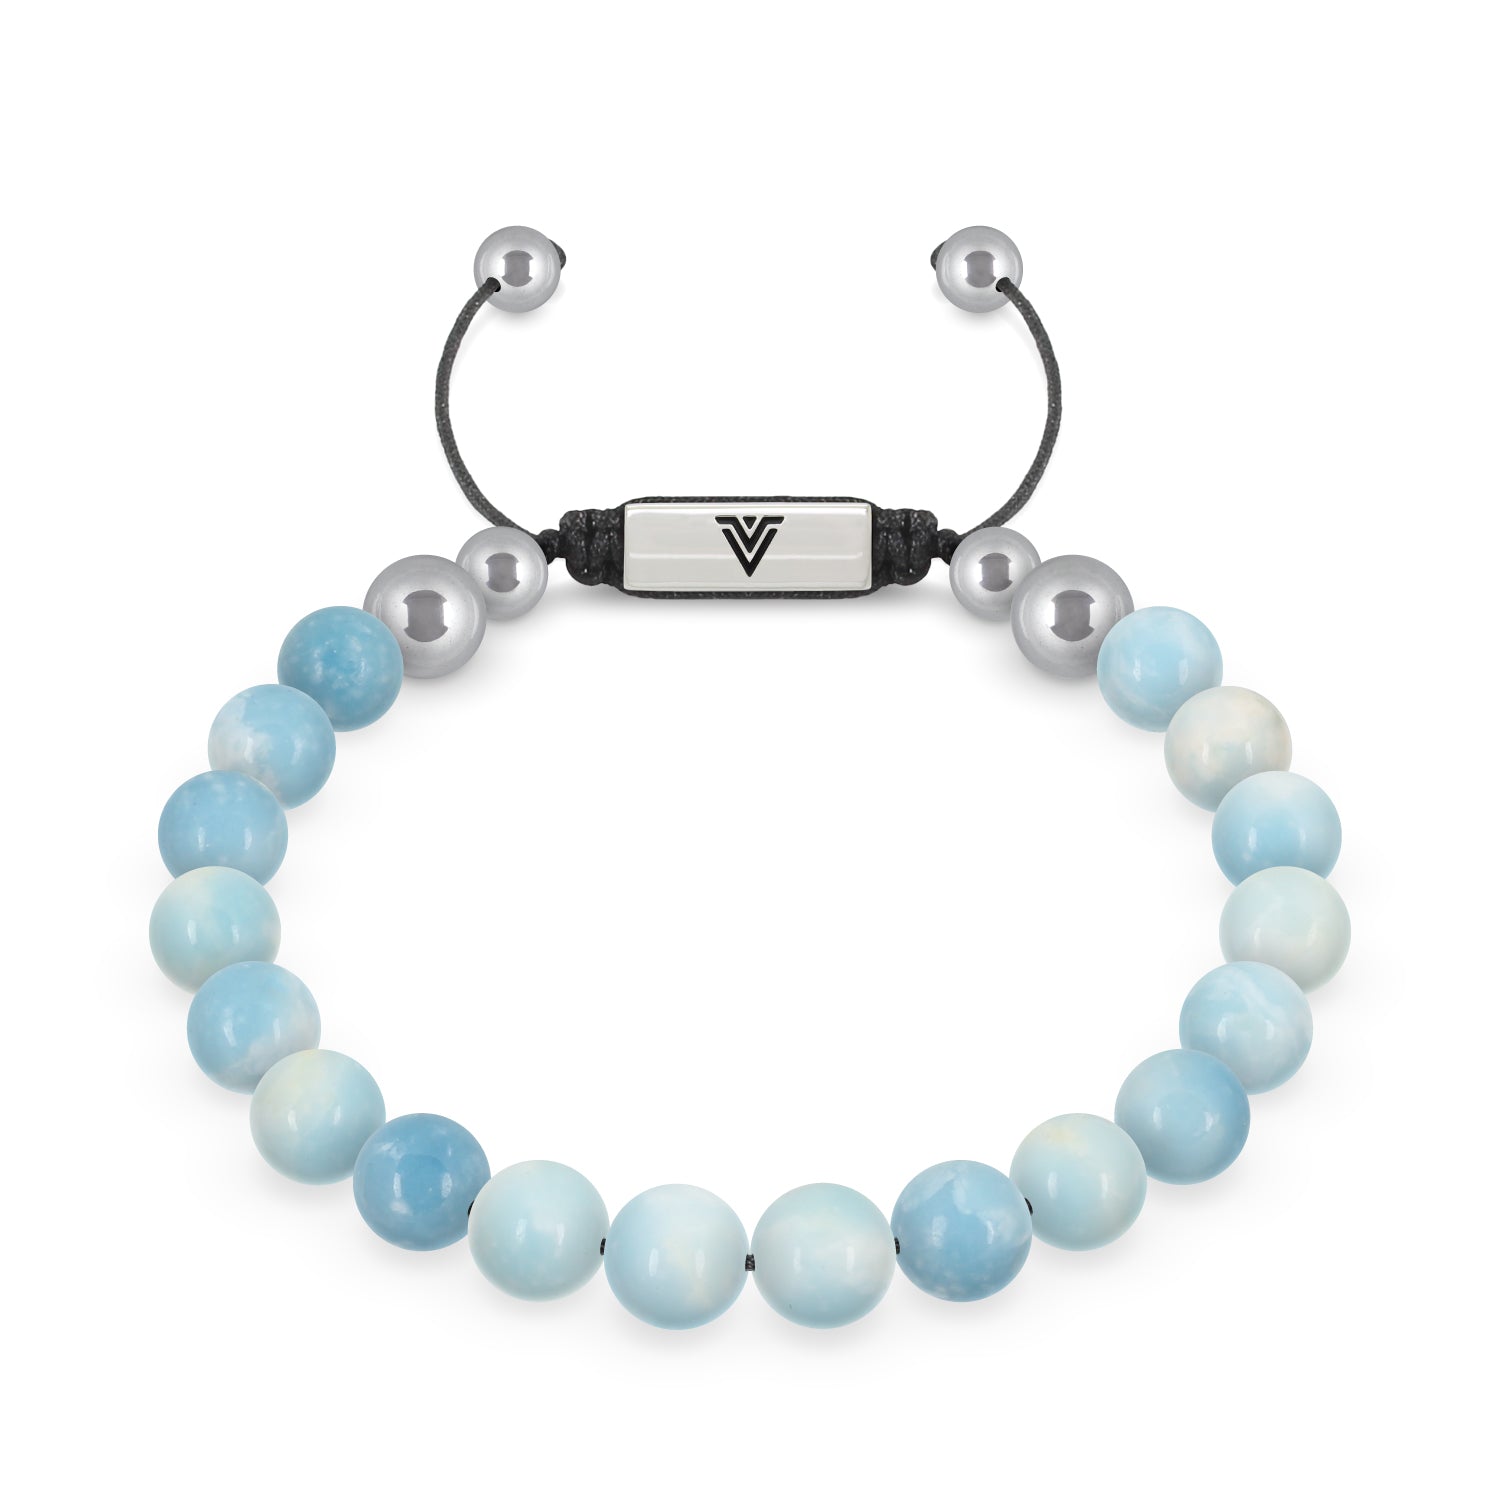 Front view of an 8mm Larimar beaded shamballa bracelet with silver stainless steel logo bead made by Voltlin